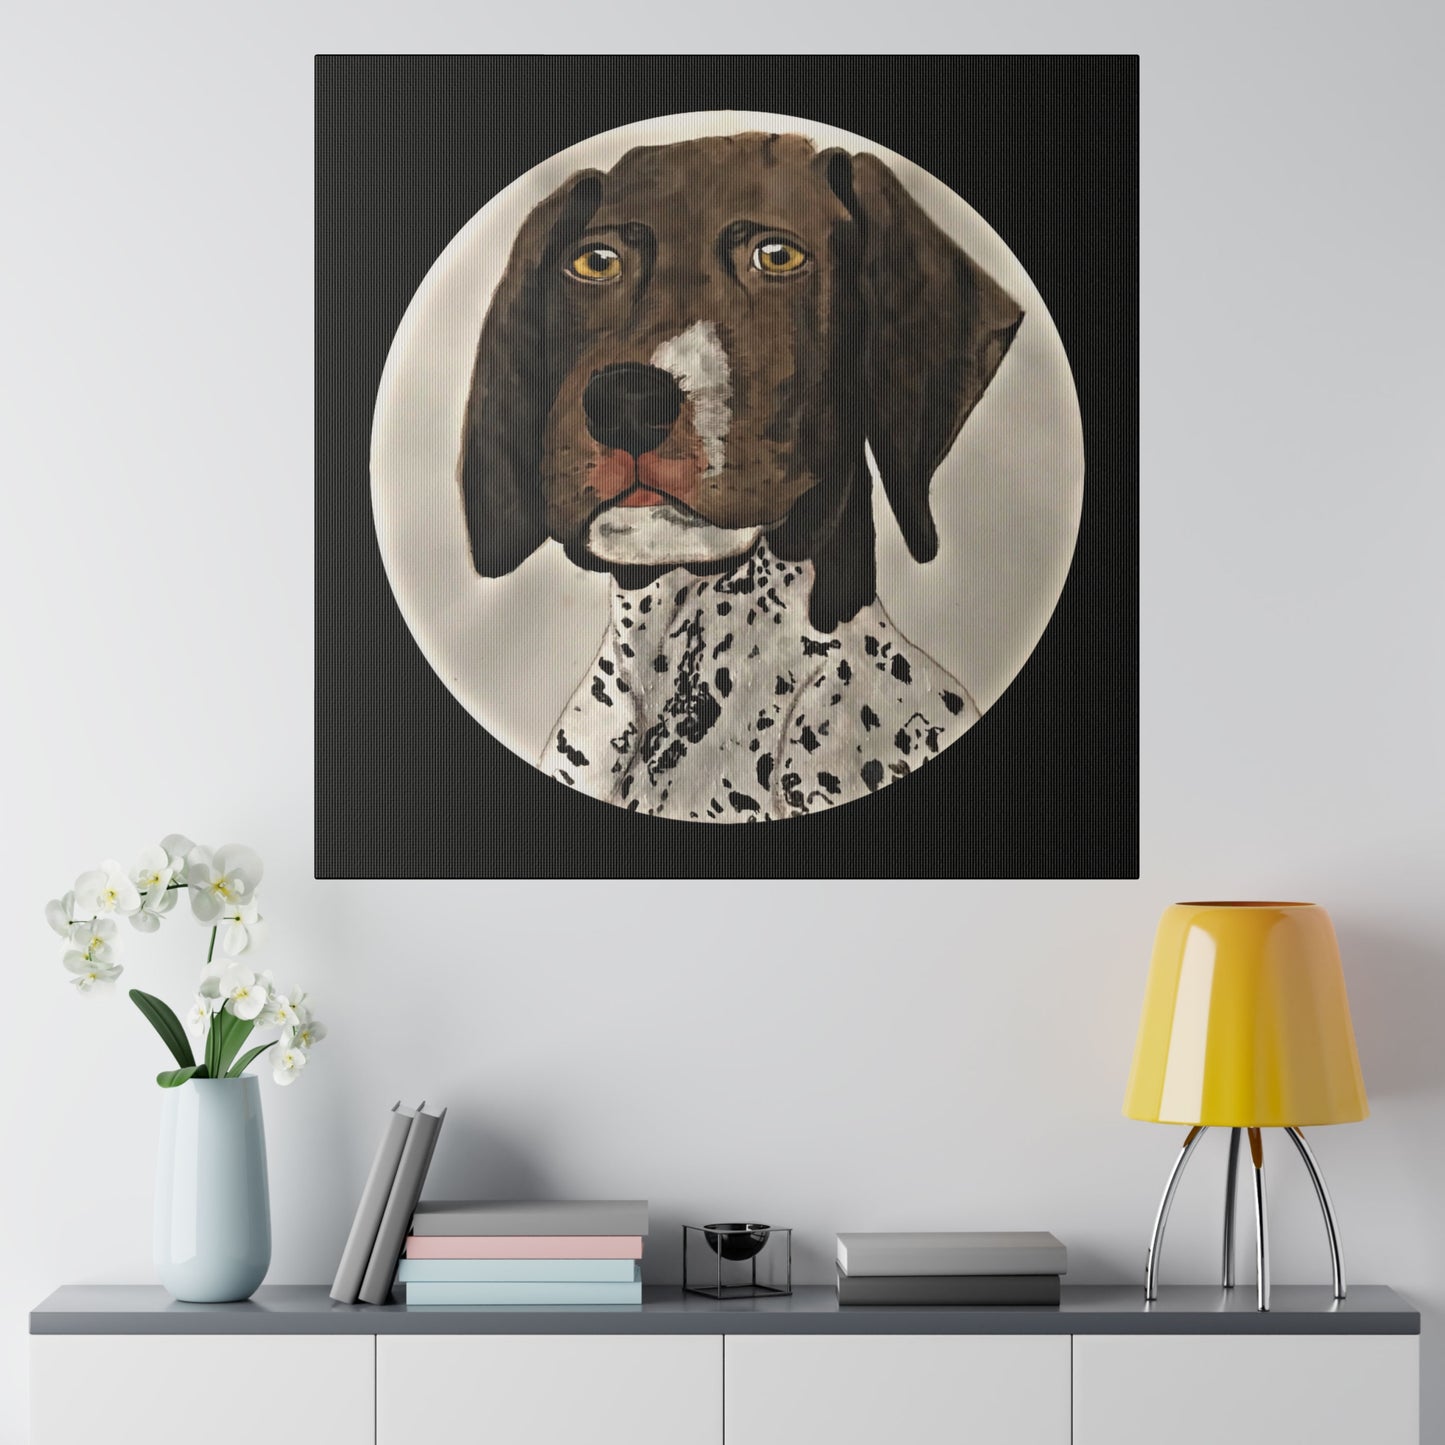 German Shorthaired Pointer, Matte Canvas, Stretched, 0.75"